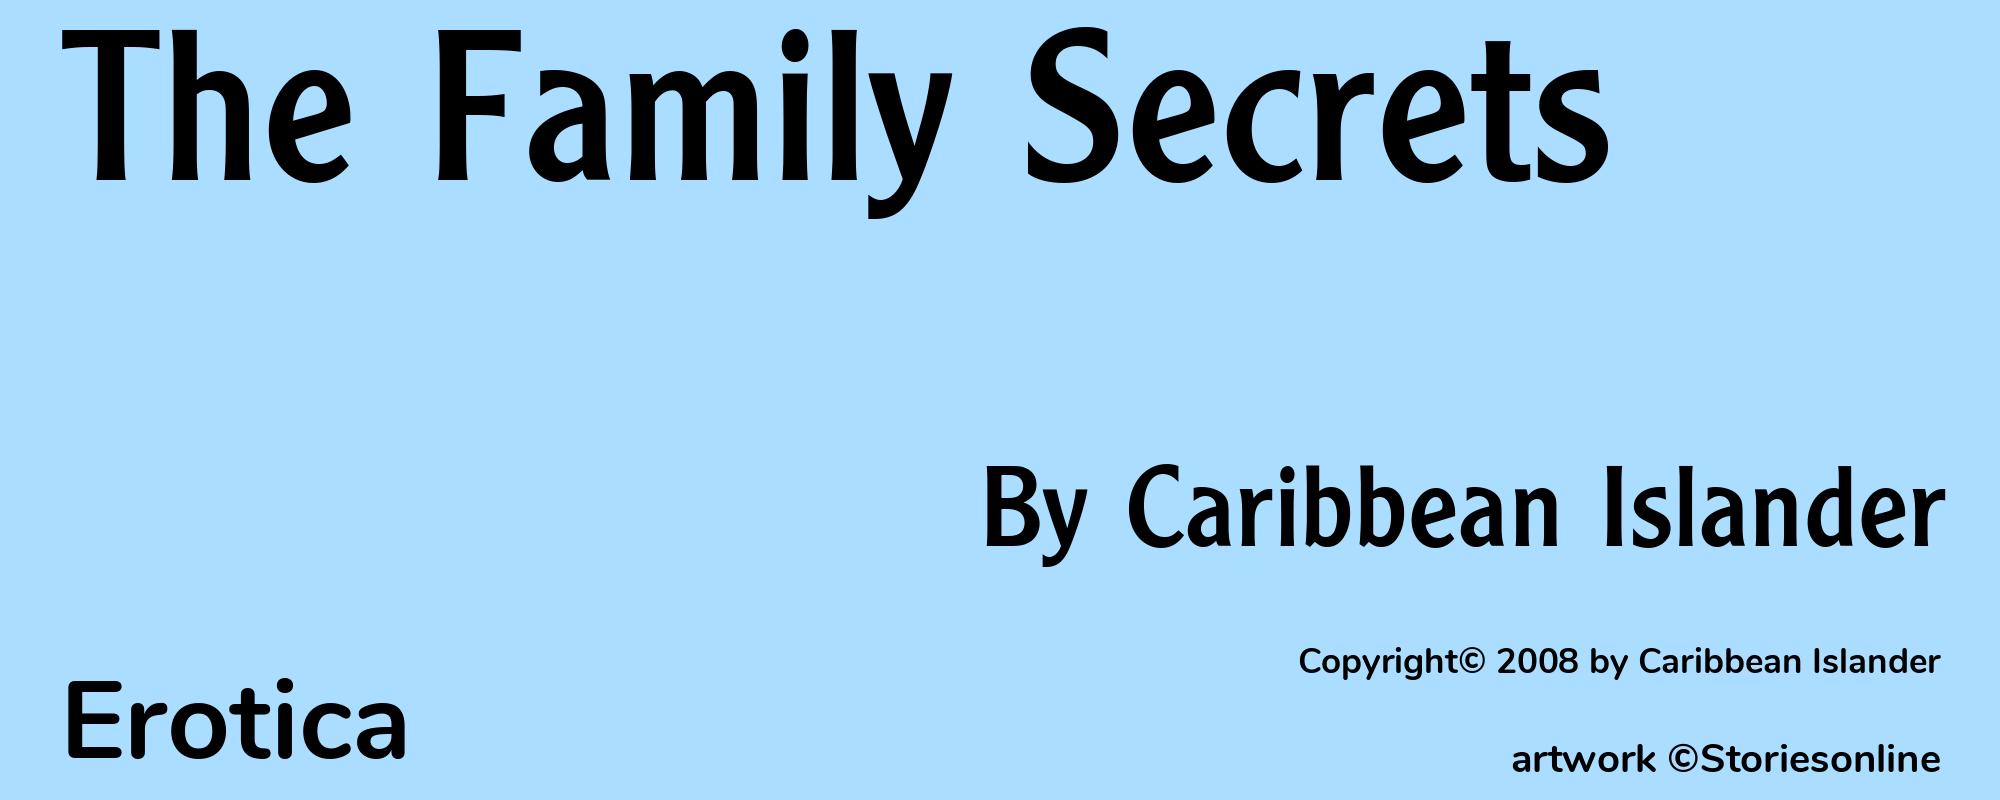 The Family Secrets - Cover